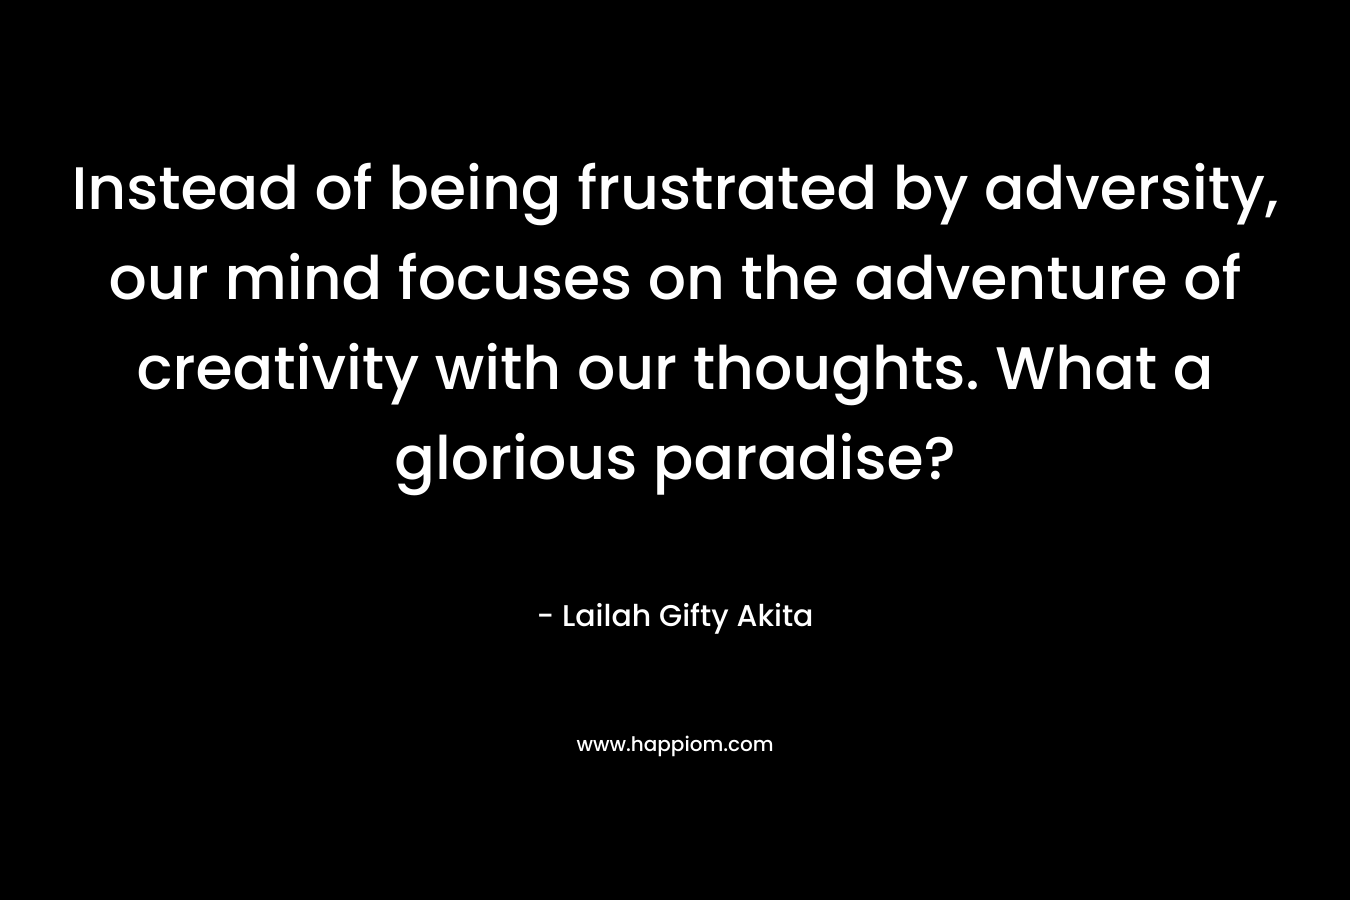 Instead of being frustrated by adversity, our mind focuses on the adventure of creativity with our thoughts. What a glorious paradise?